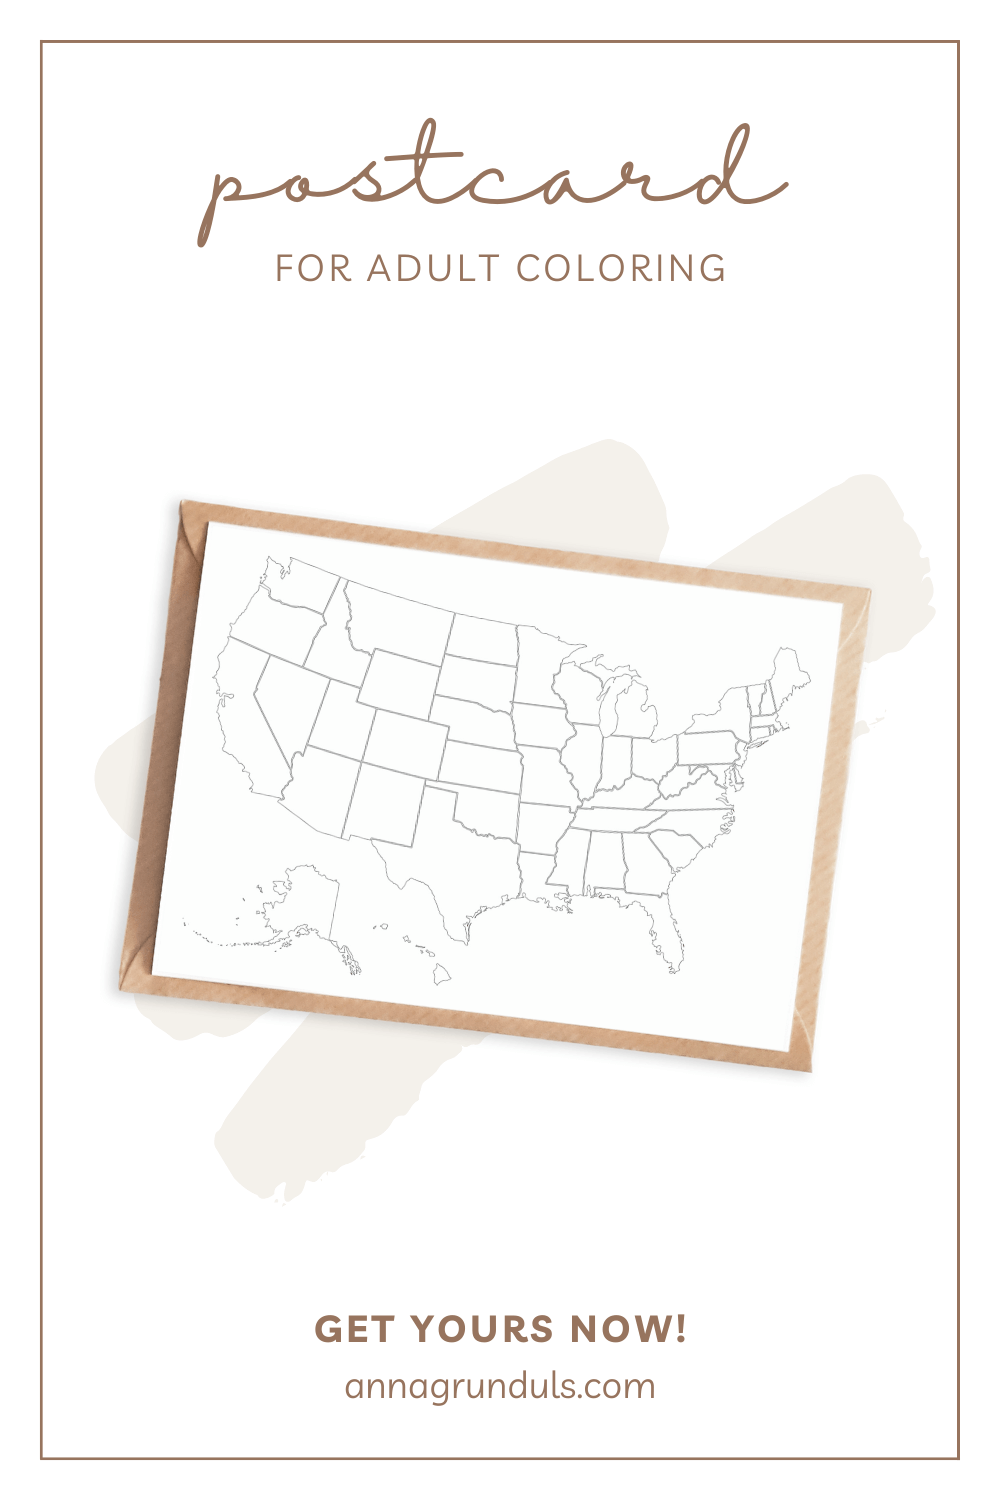 USA map postcard for adult coloring pinterest pin